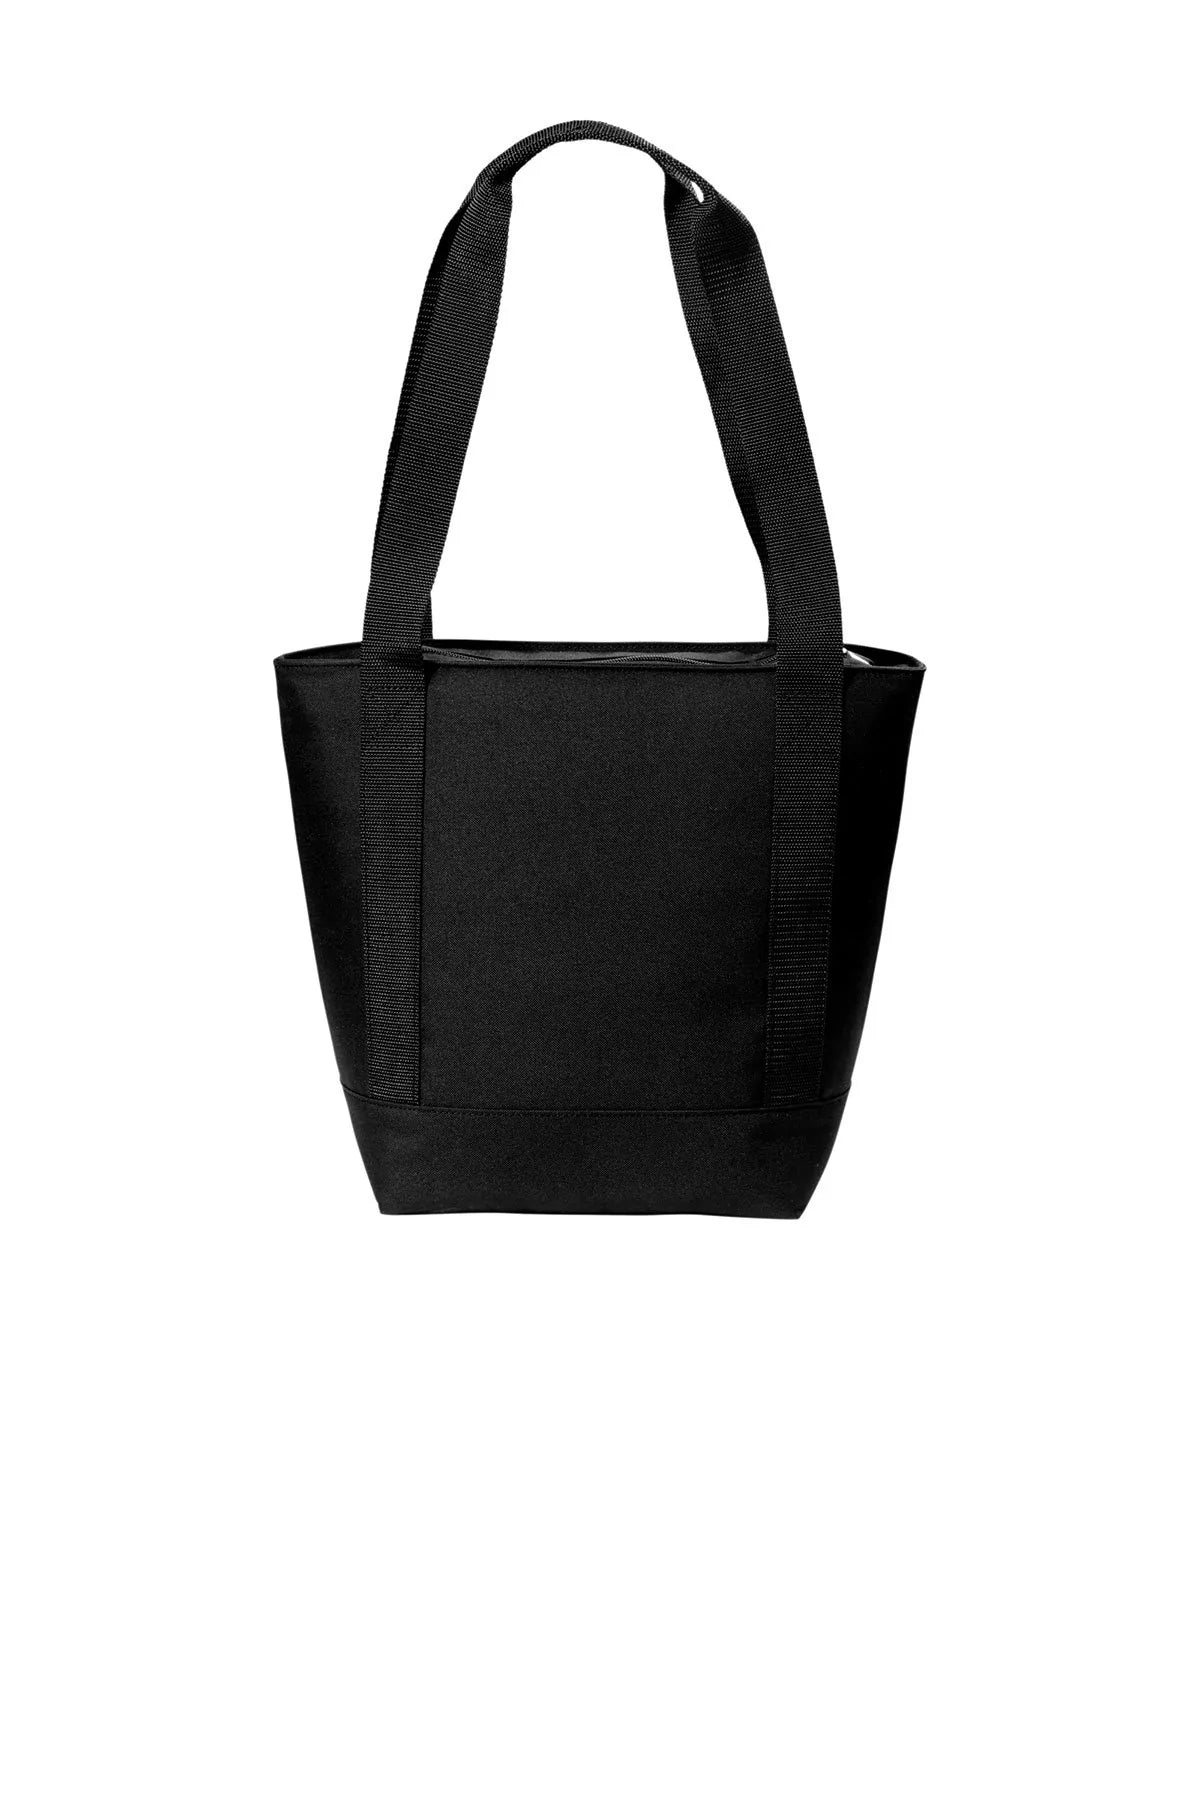 Carhartt Tote, 18-Can Customized Coolers, Black